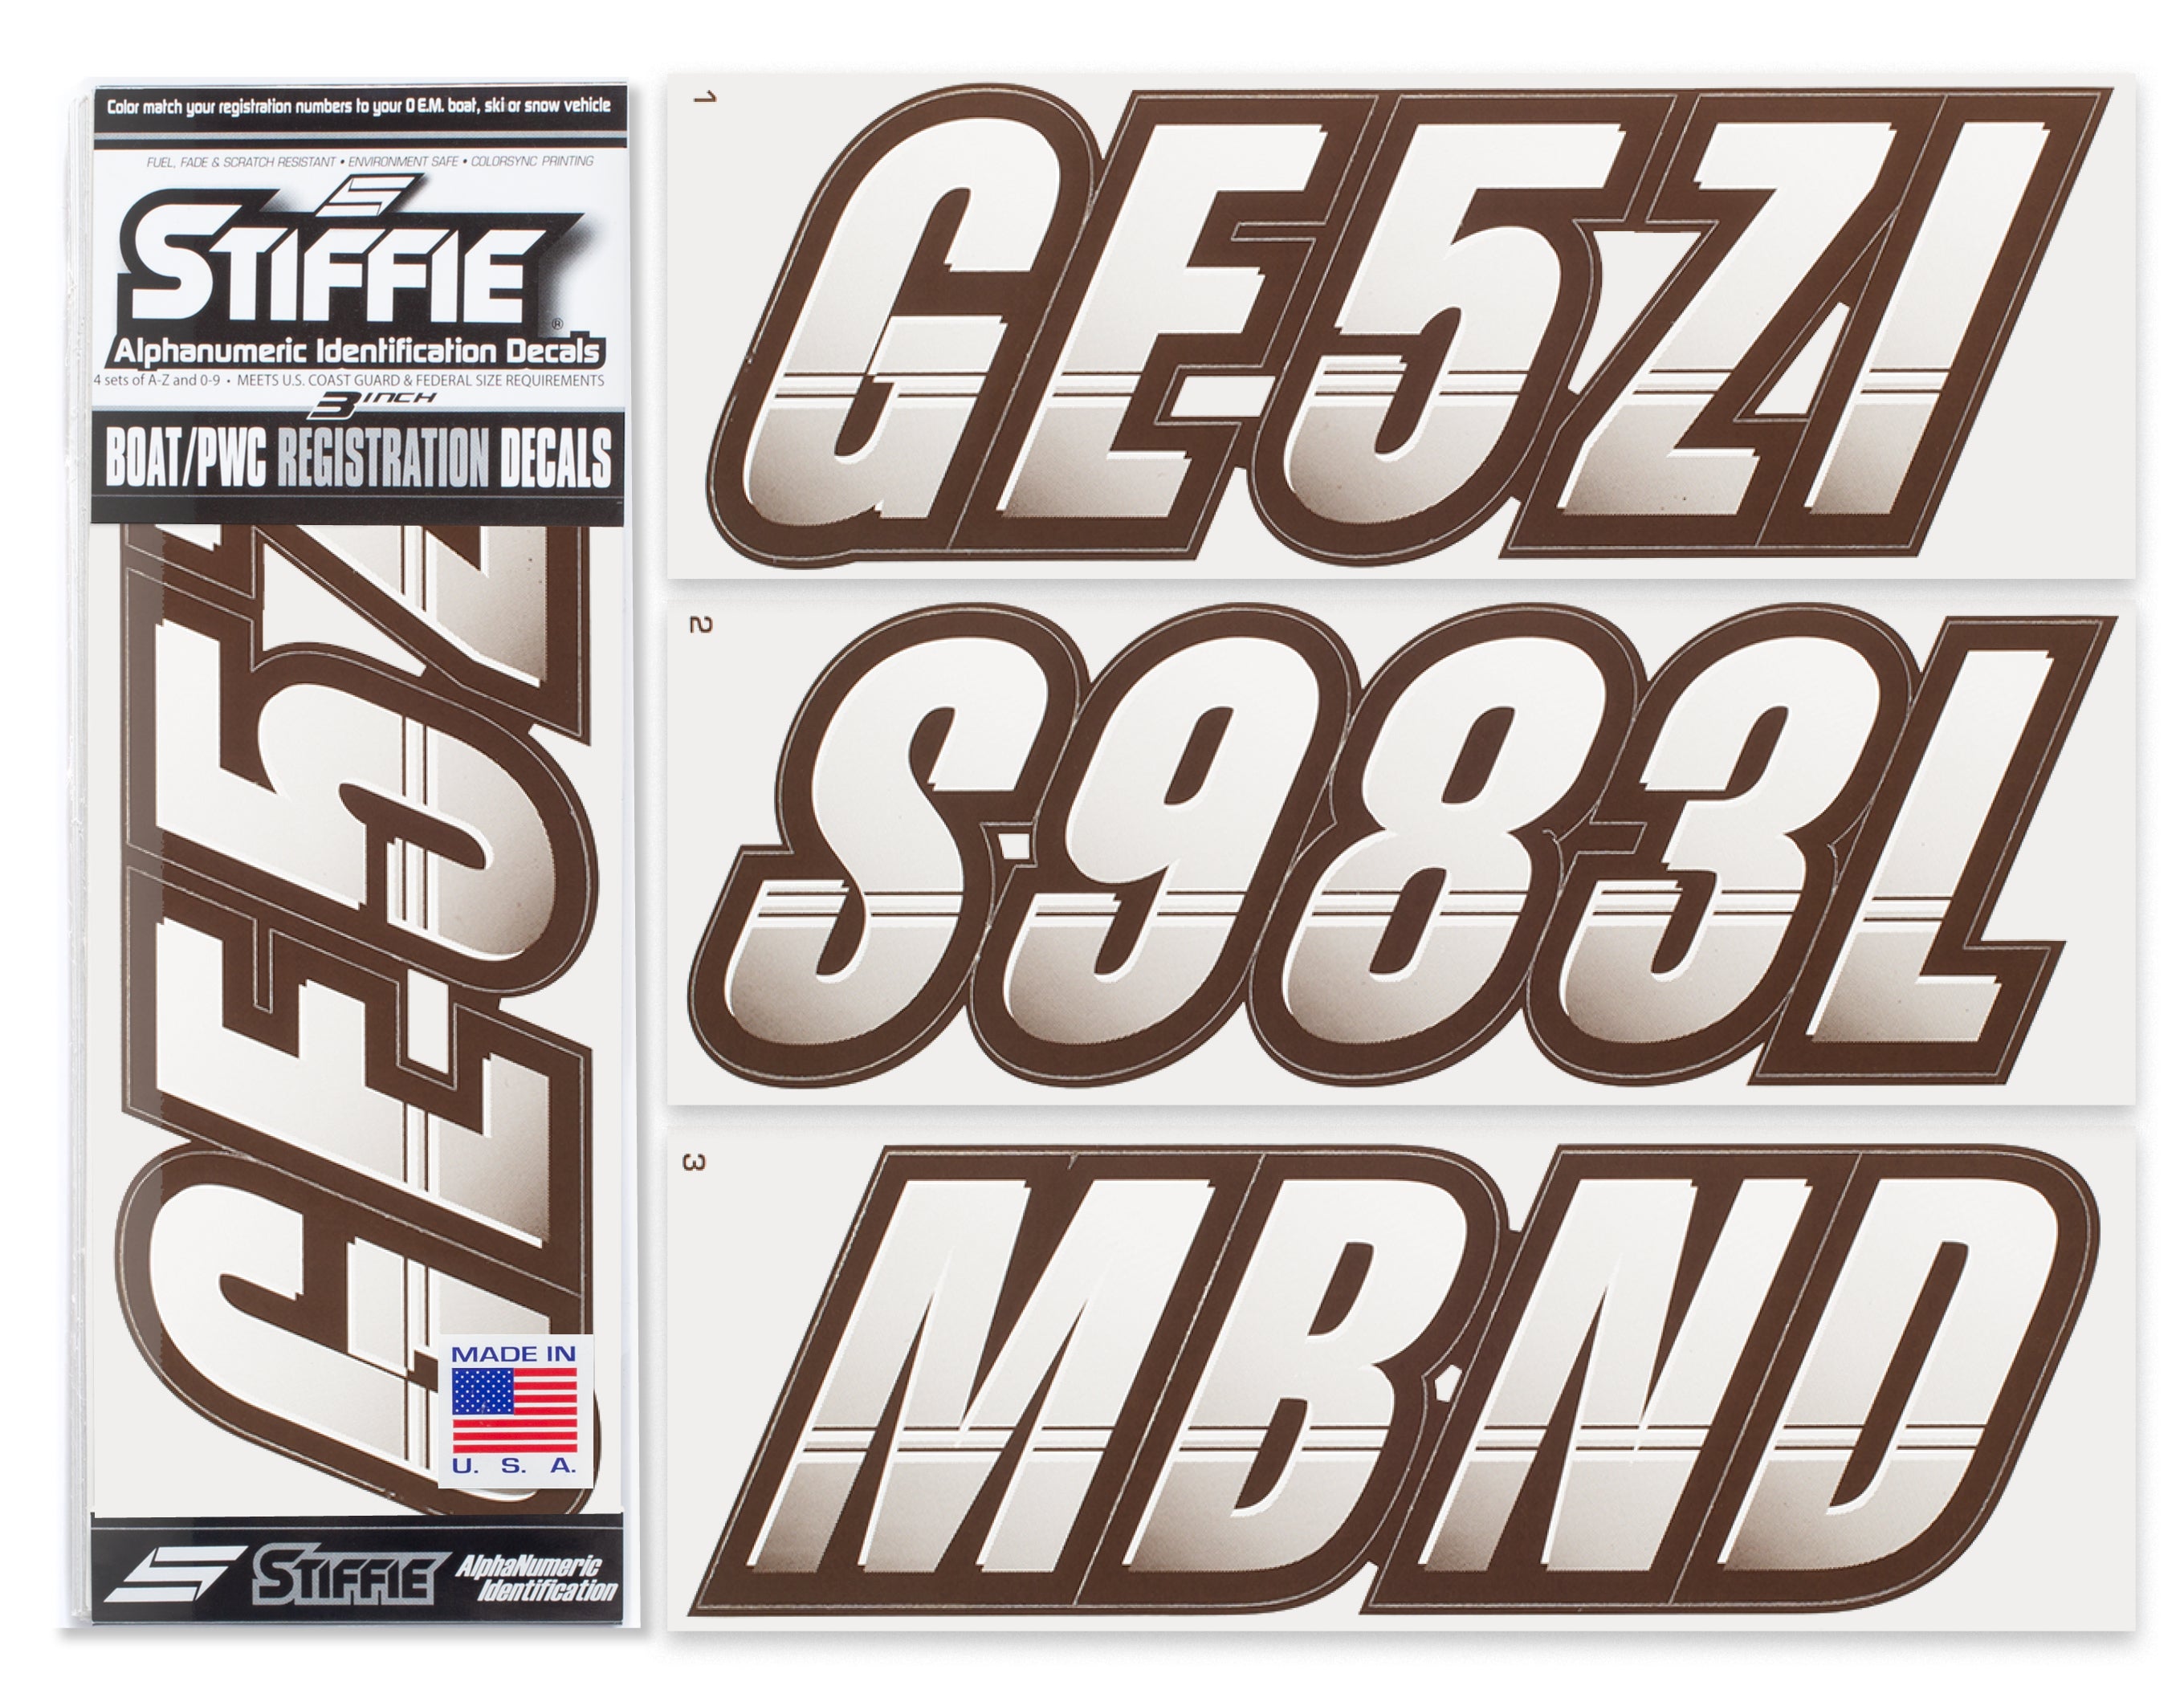 Stiffie Techtron White/Espresso Brown 3" Alpha-Numeric Registration Identification Numbers Stickers Decals for Boats & Personal Watercraft